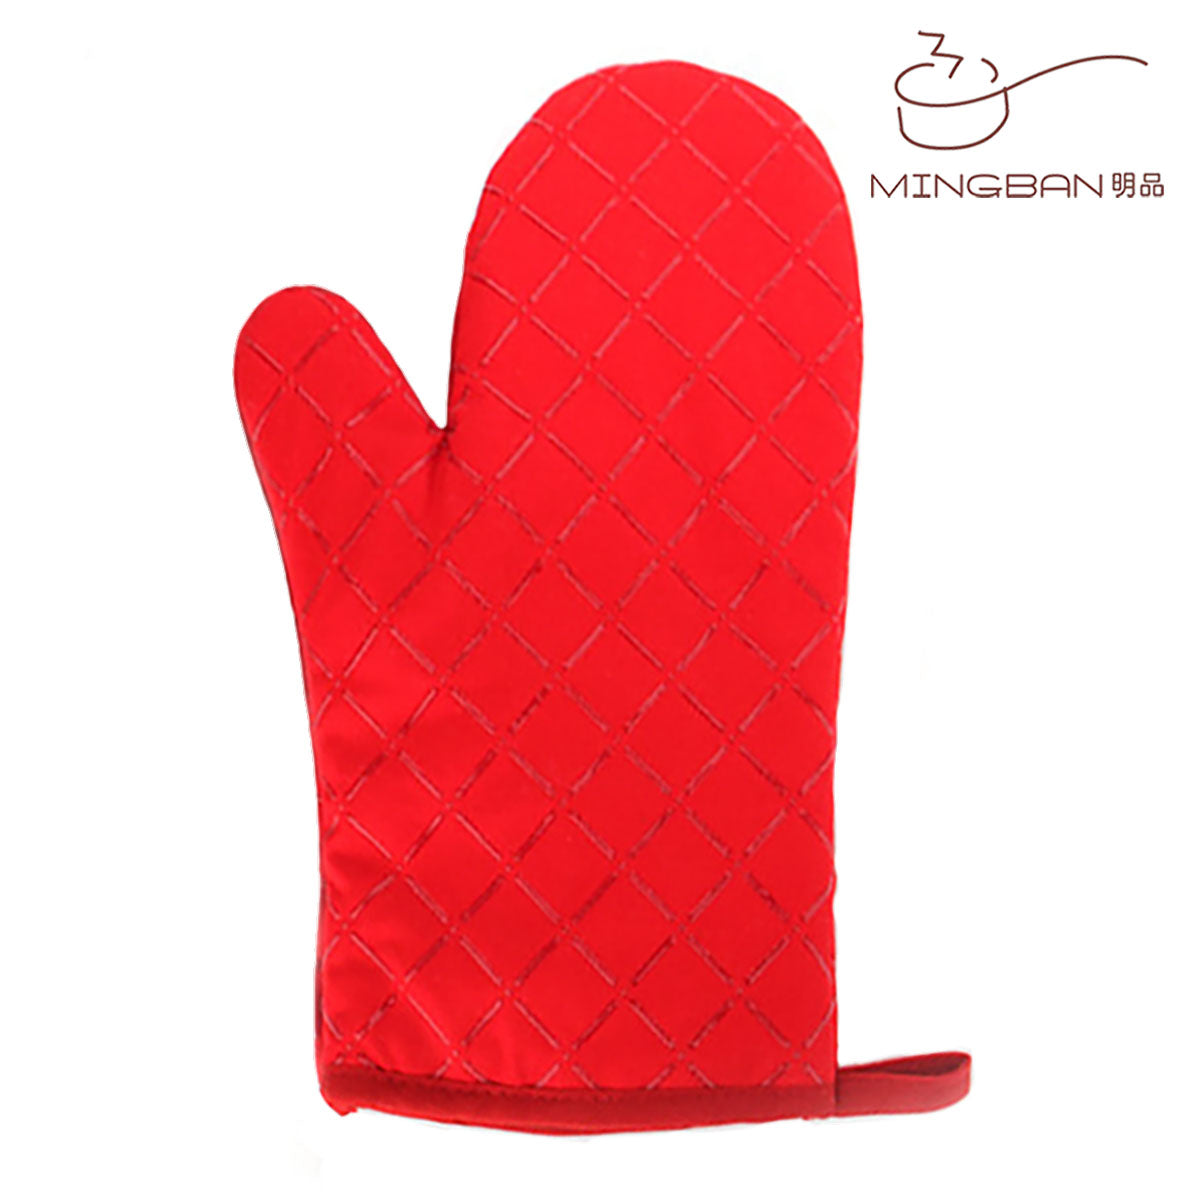 Checked Silicone Strip Oven Mitt - Red